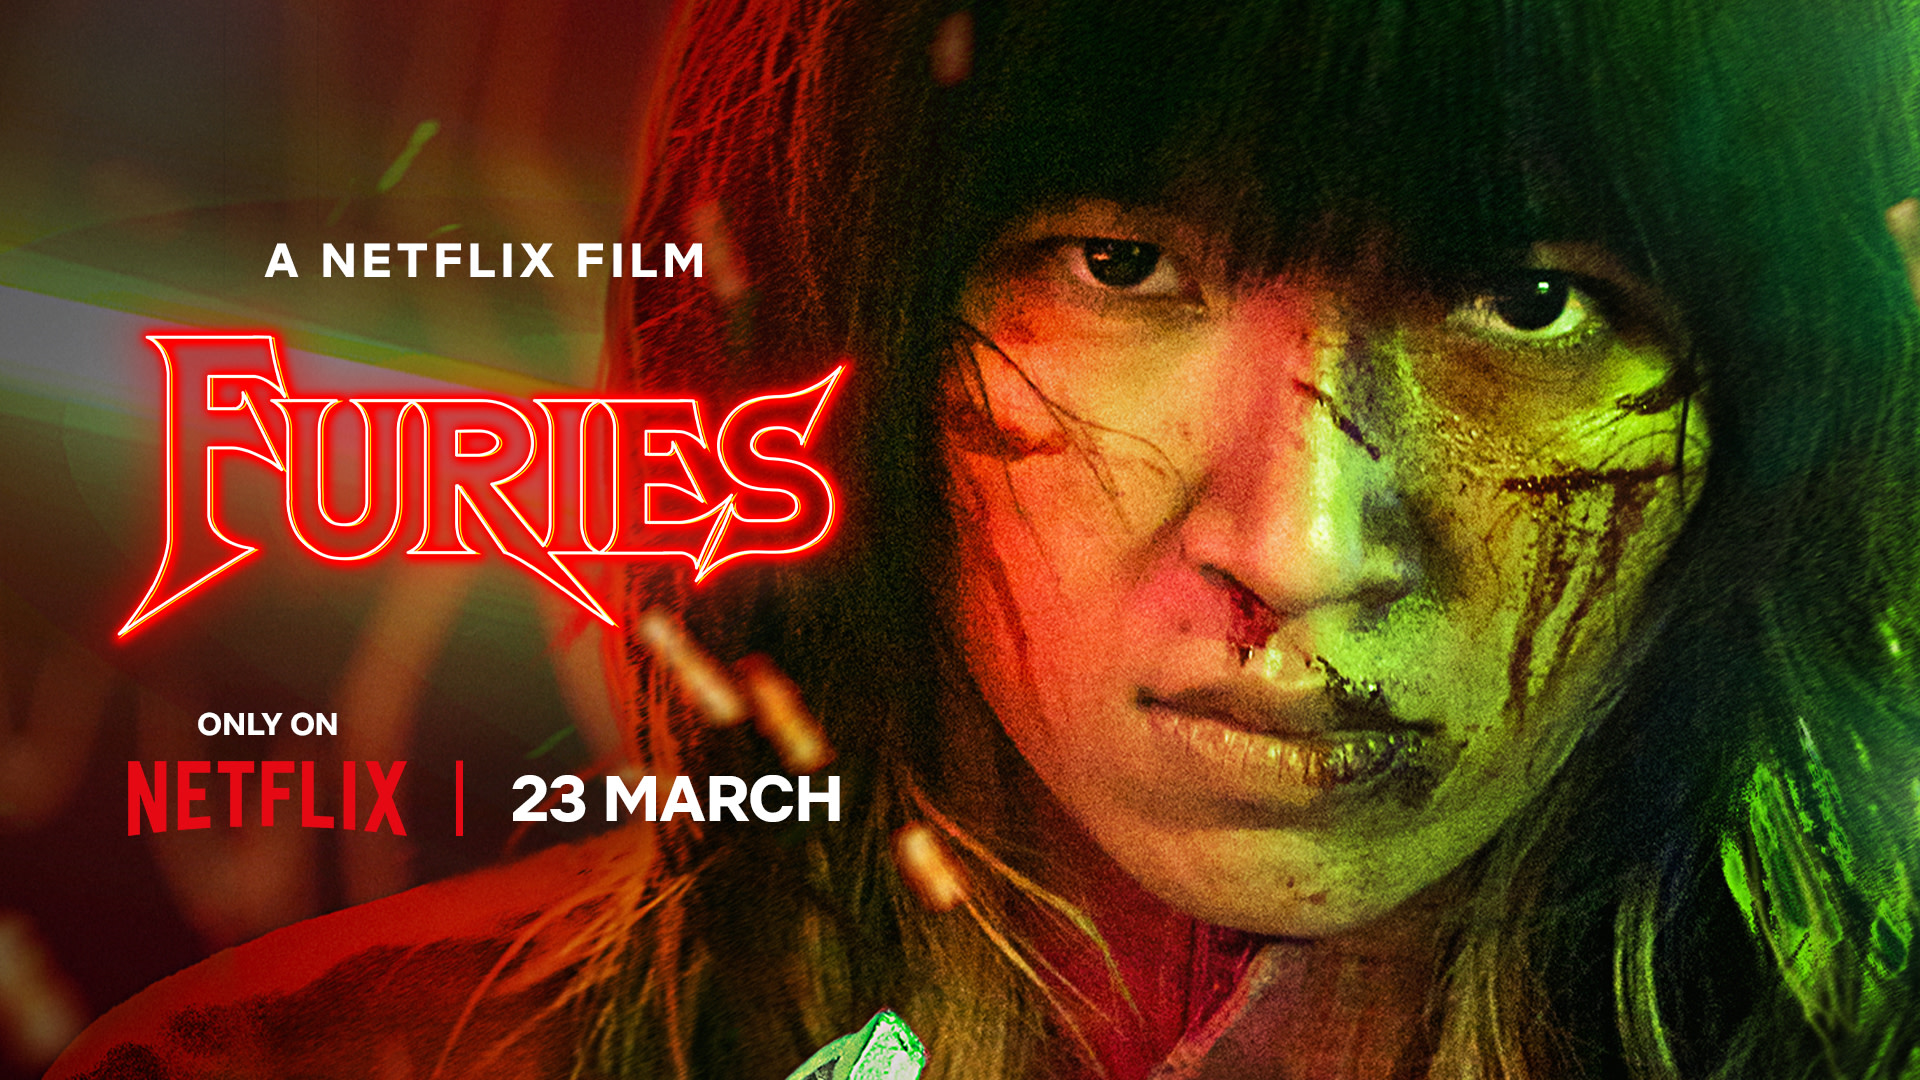 Furie - One of the most well-known action flicks Netflix Vietnamese movies